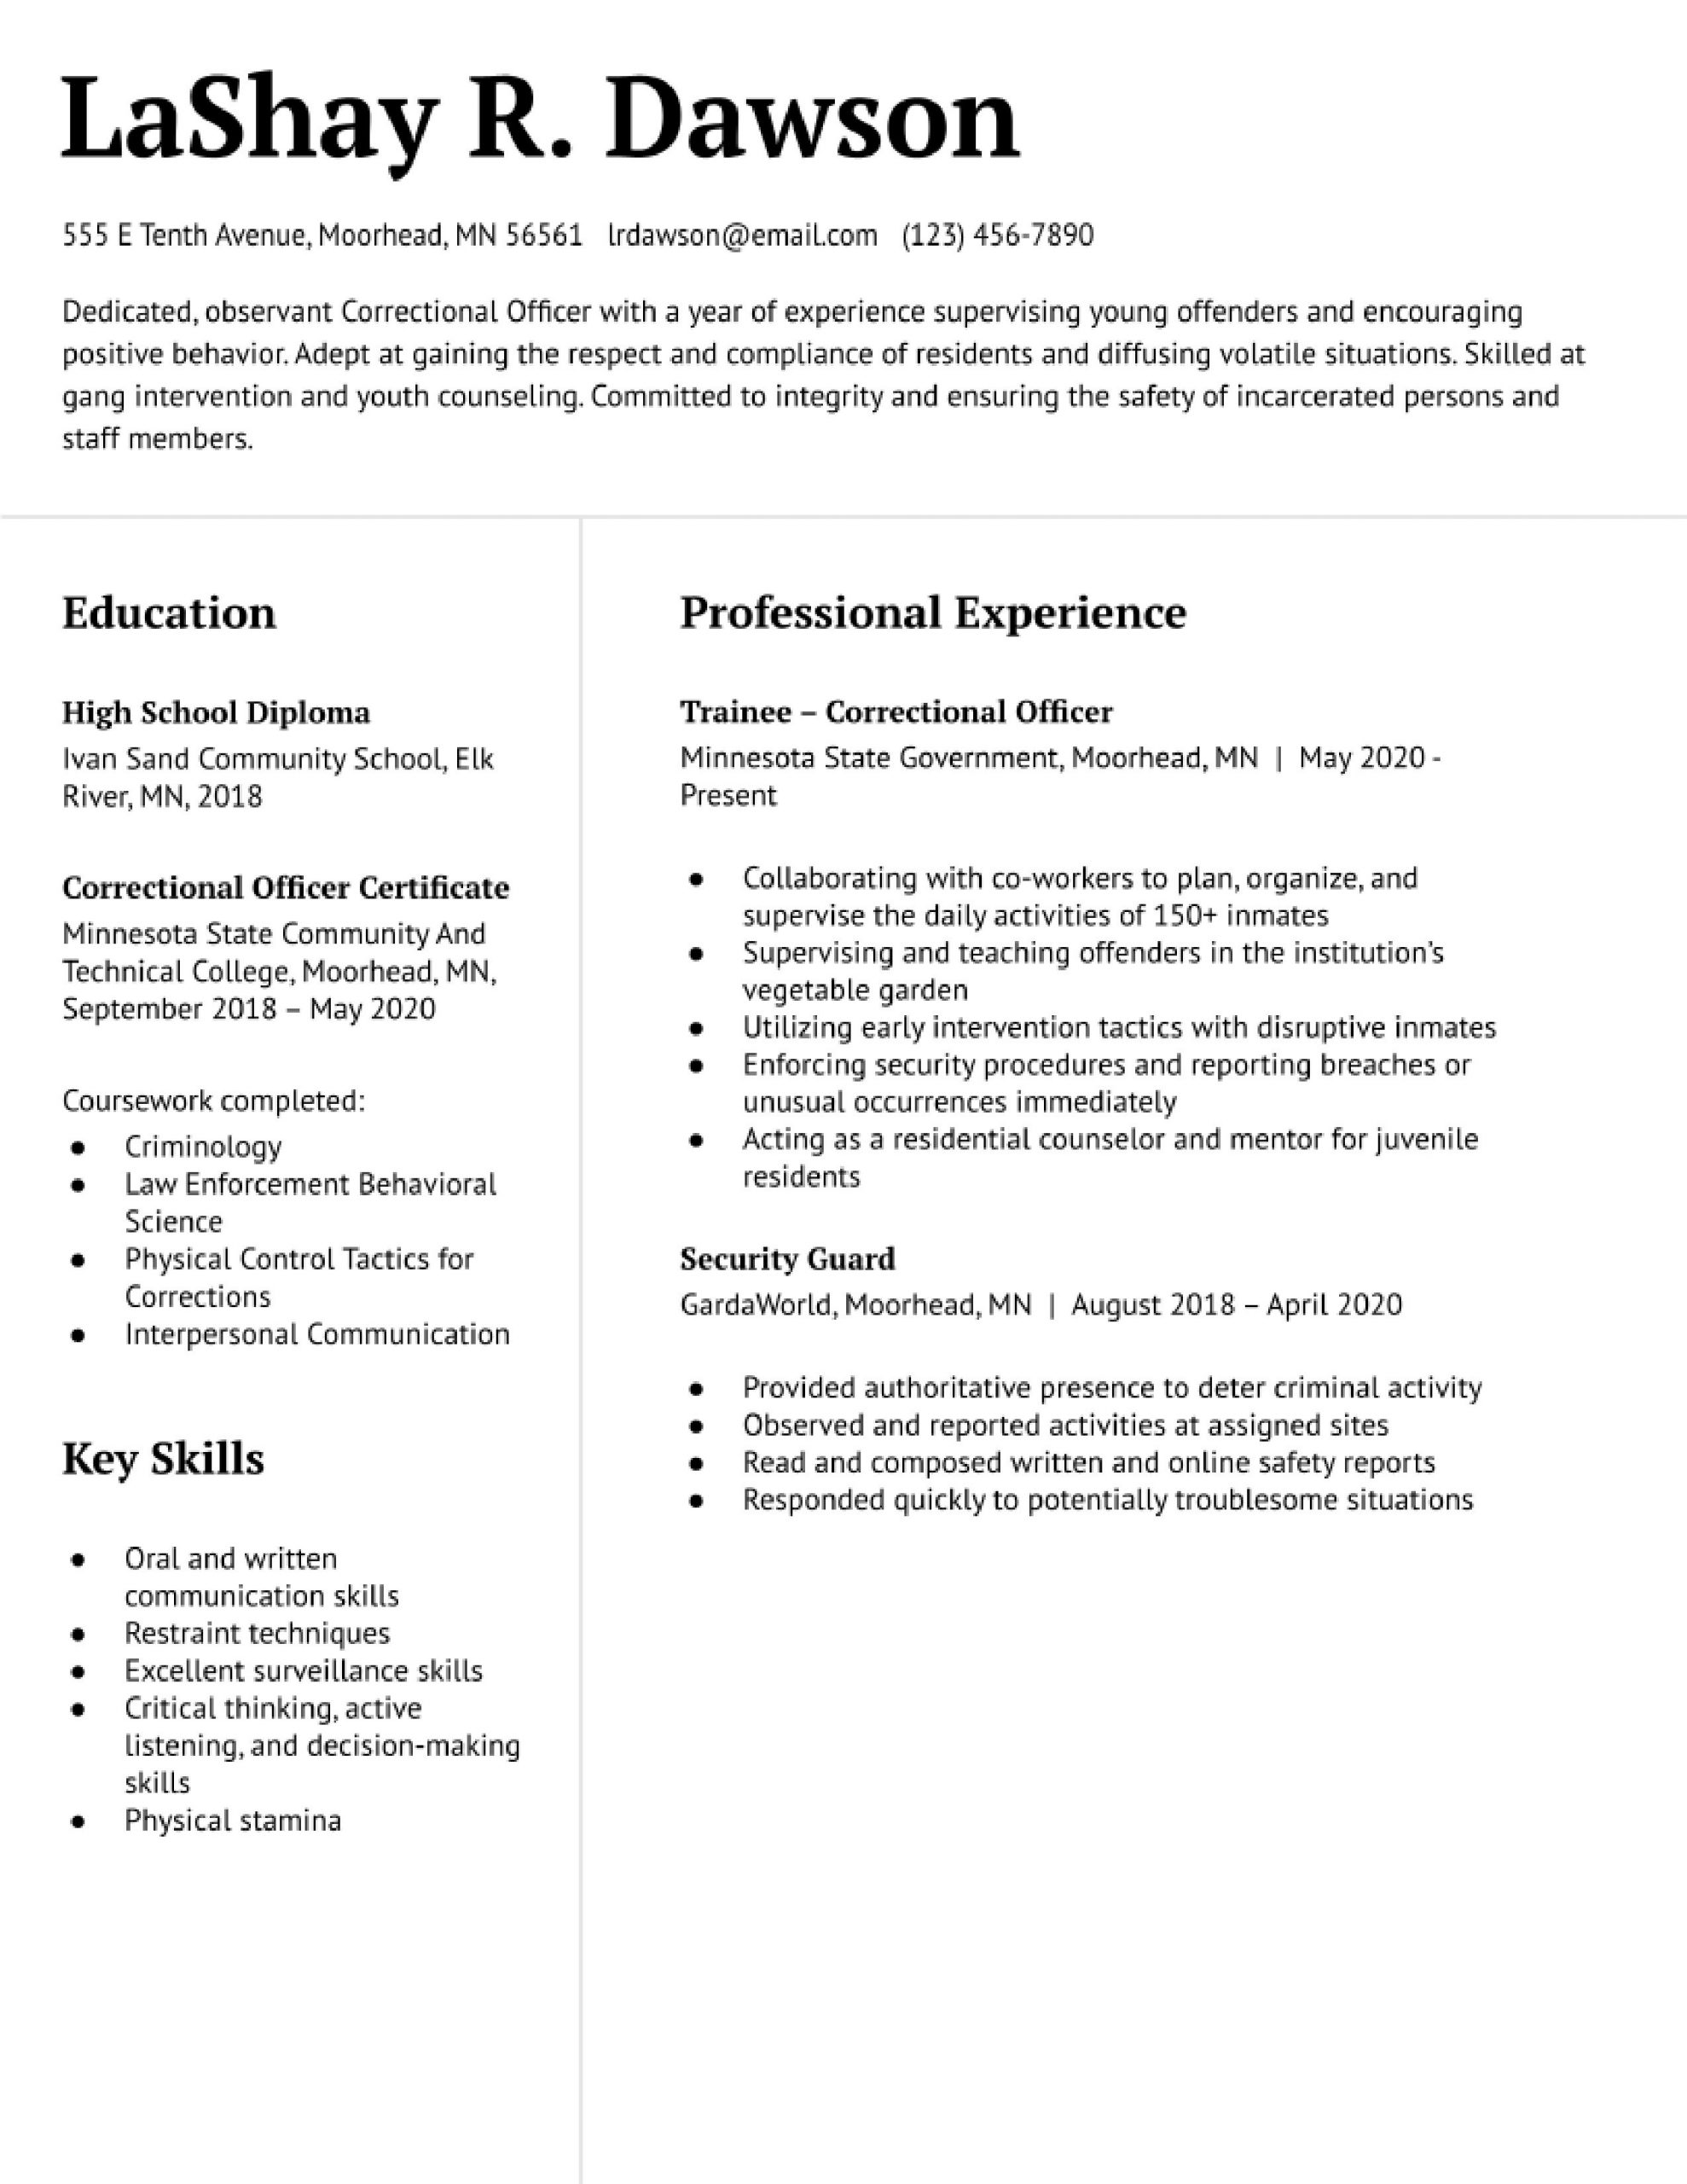 Sample Resume for Correctional Officer with No Experience Correctional Officer Resume Examples – Resumebuilder.com